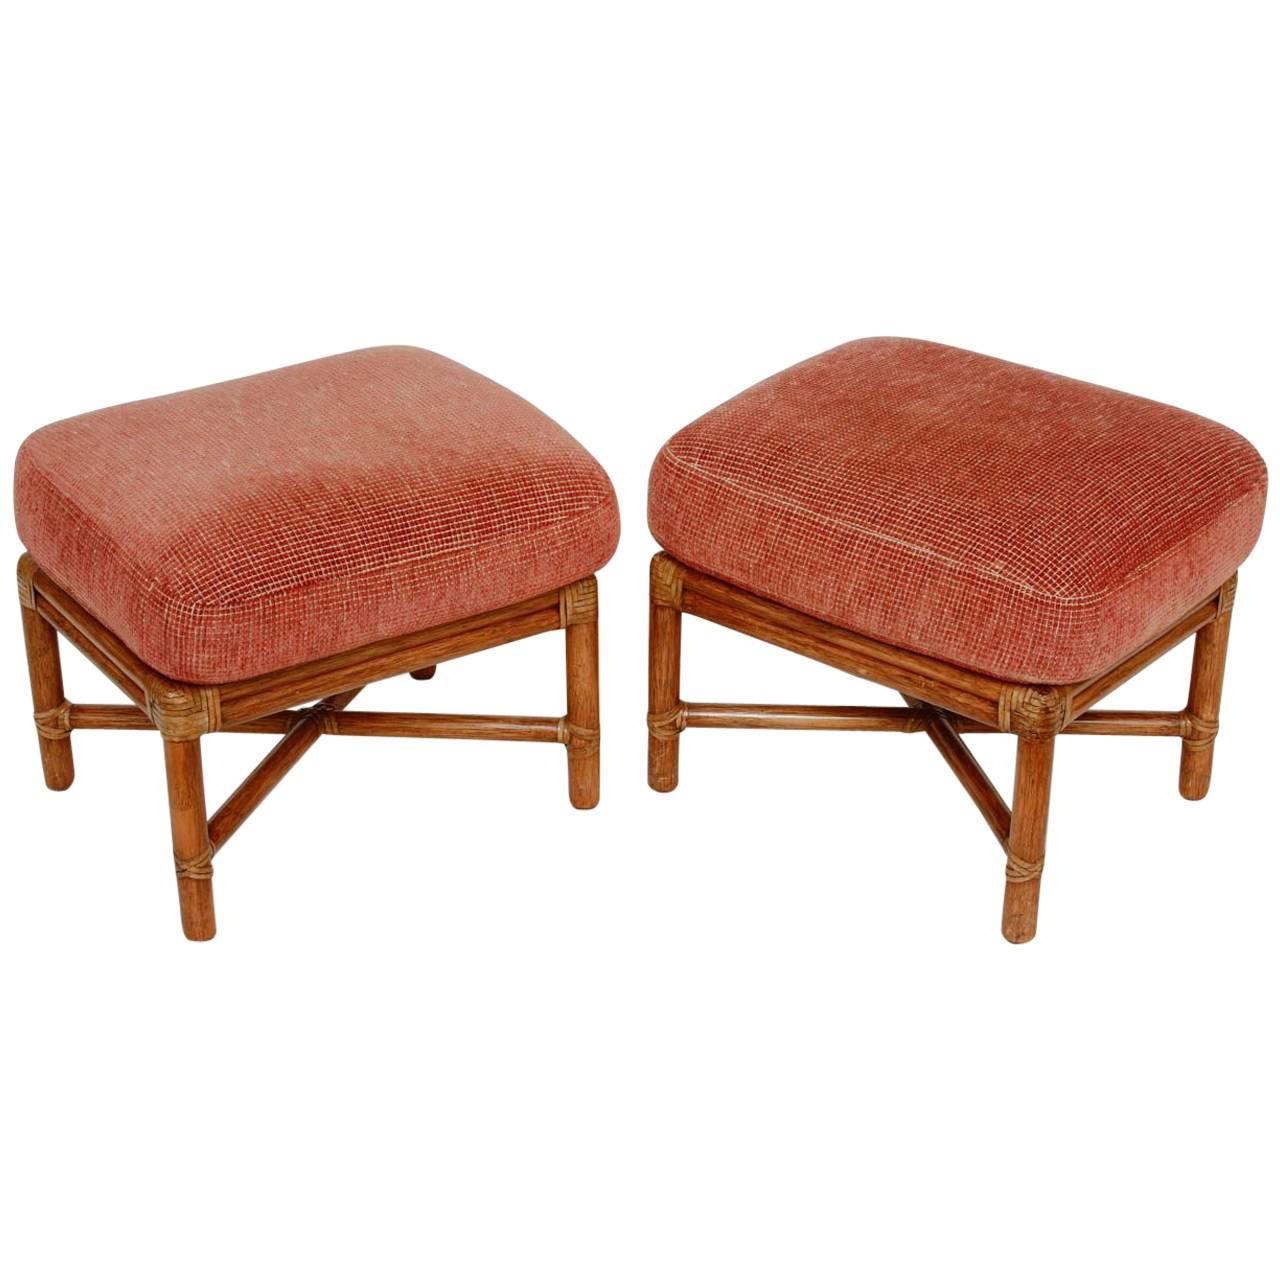 Pair of McGuire Bamboo Rattan Upholstered Ottomans